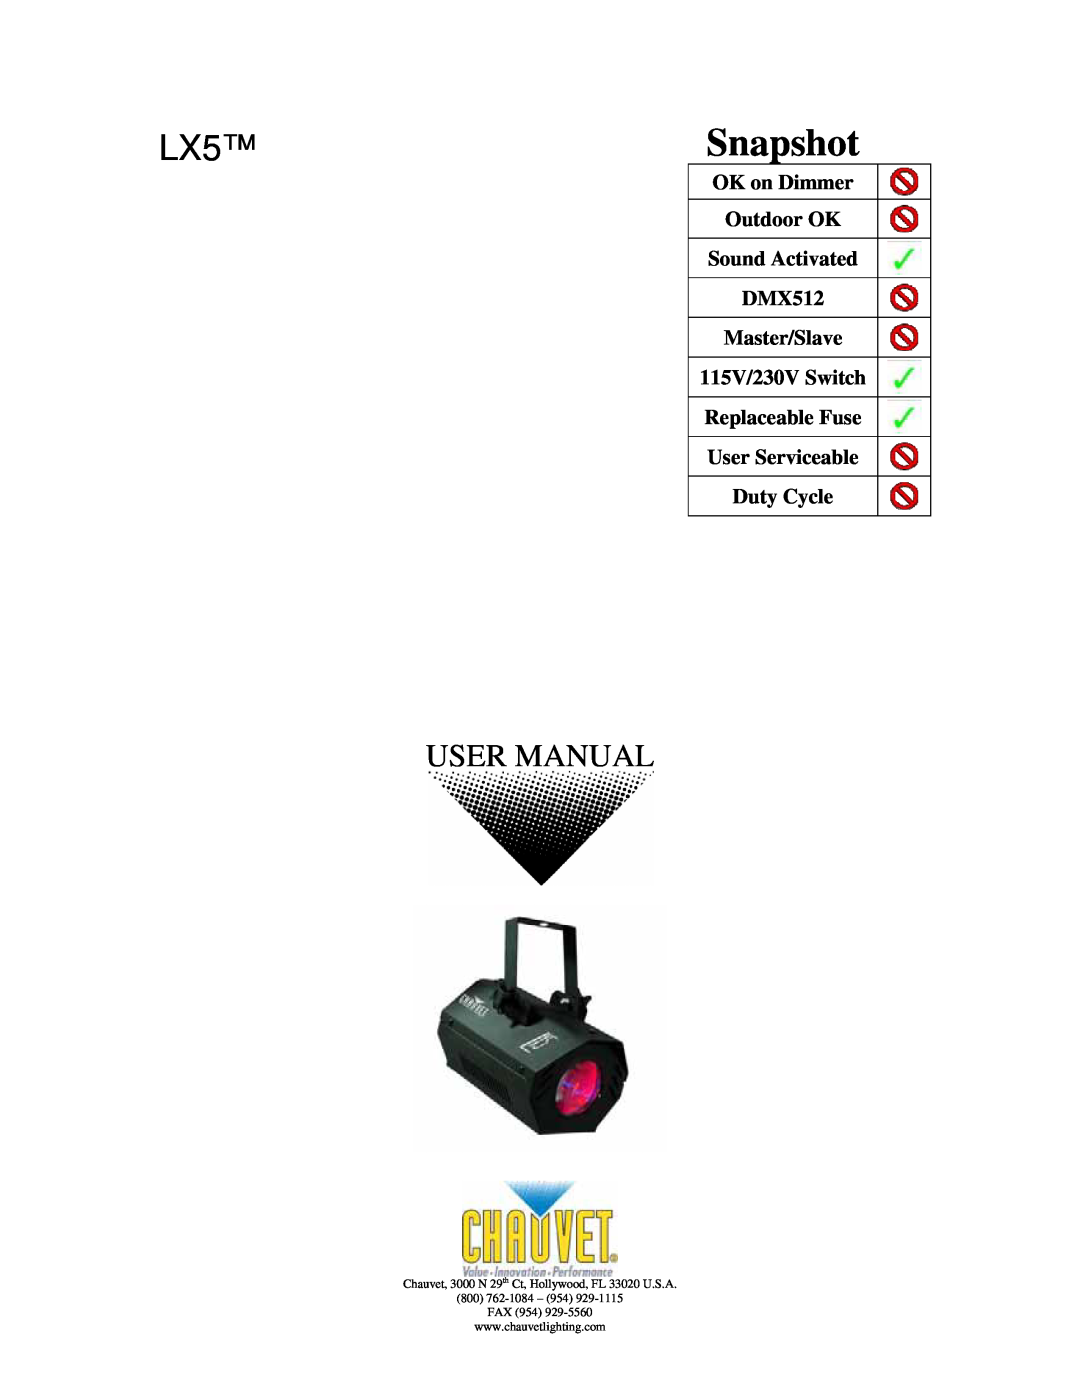 Chauvet user manual LX5Snapshot, OK on Dimmer Outdoor OK Sound Activated DMX512, User Serviceable Duty Cycle 